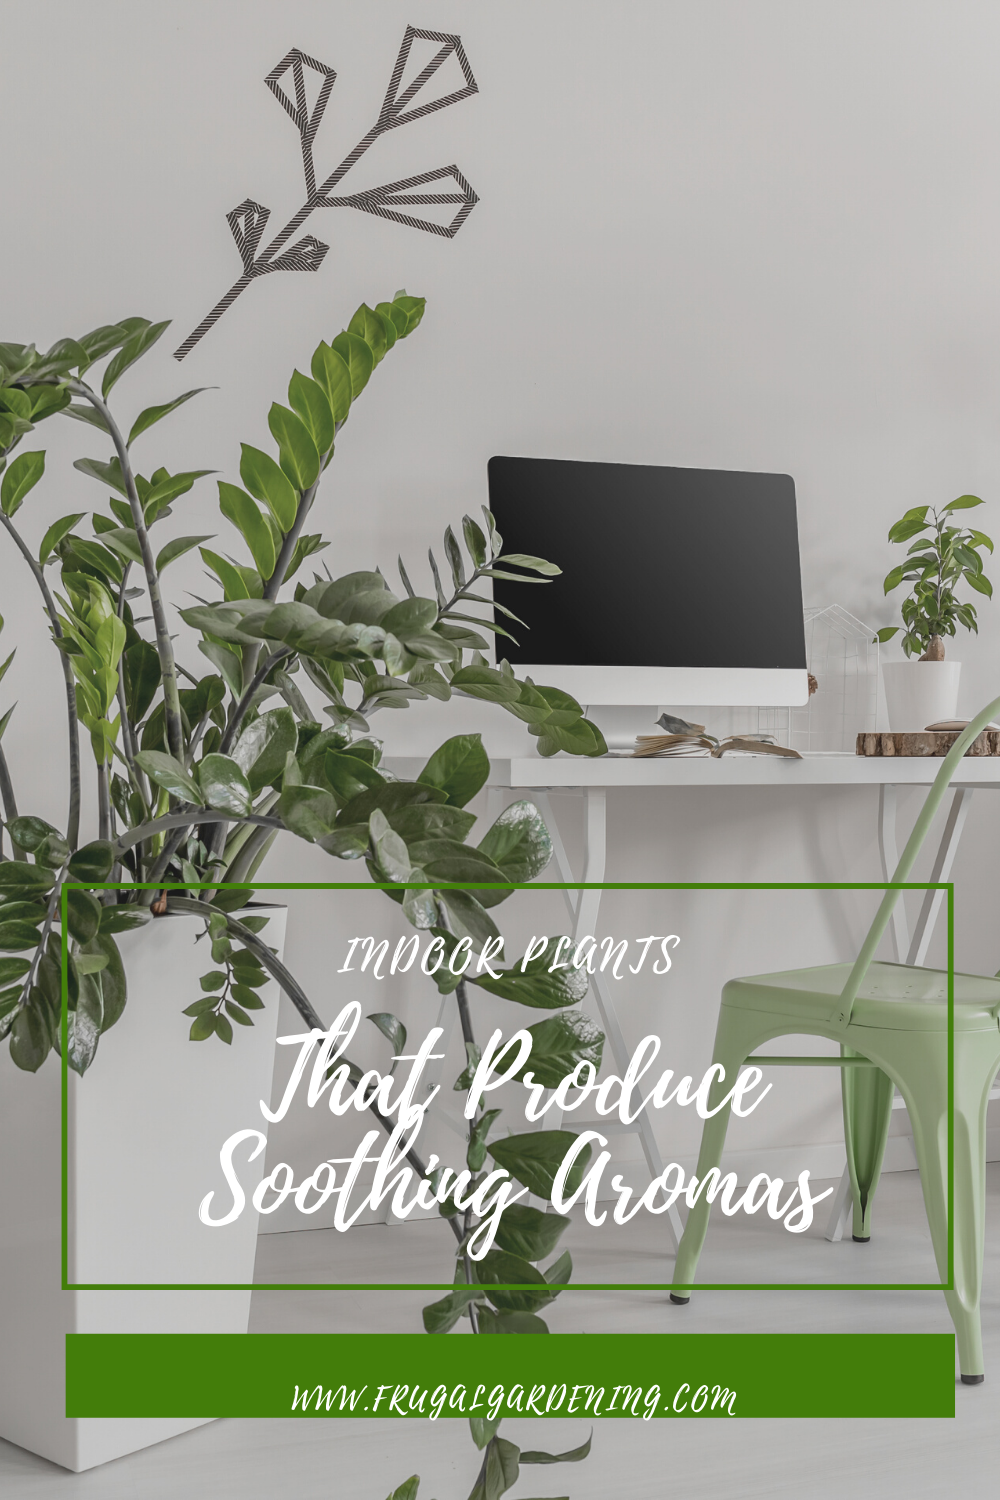 Indoor Plants That Produce Soothing Aromas